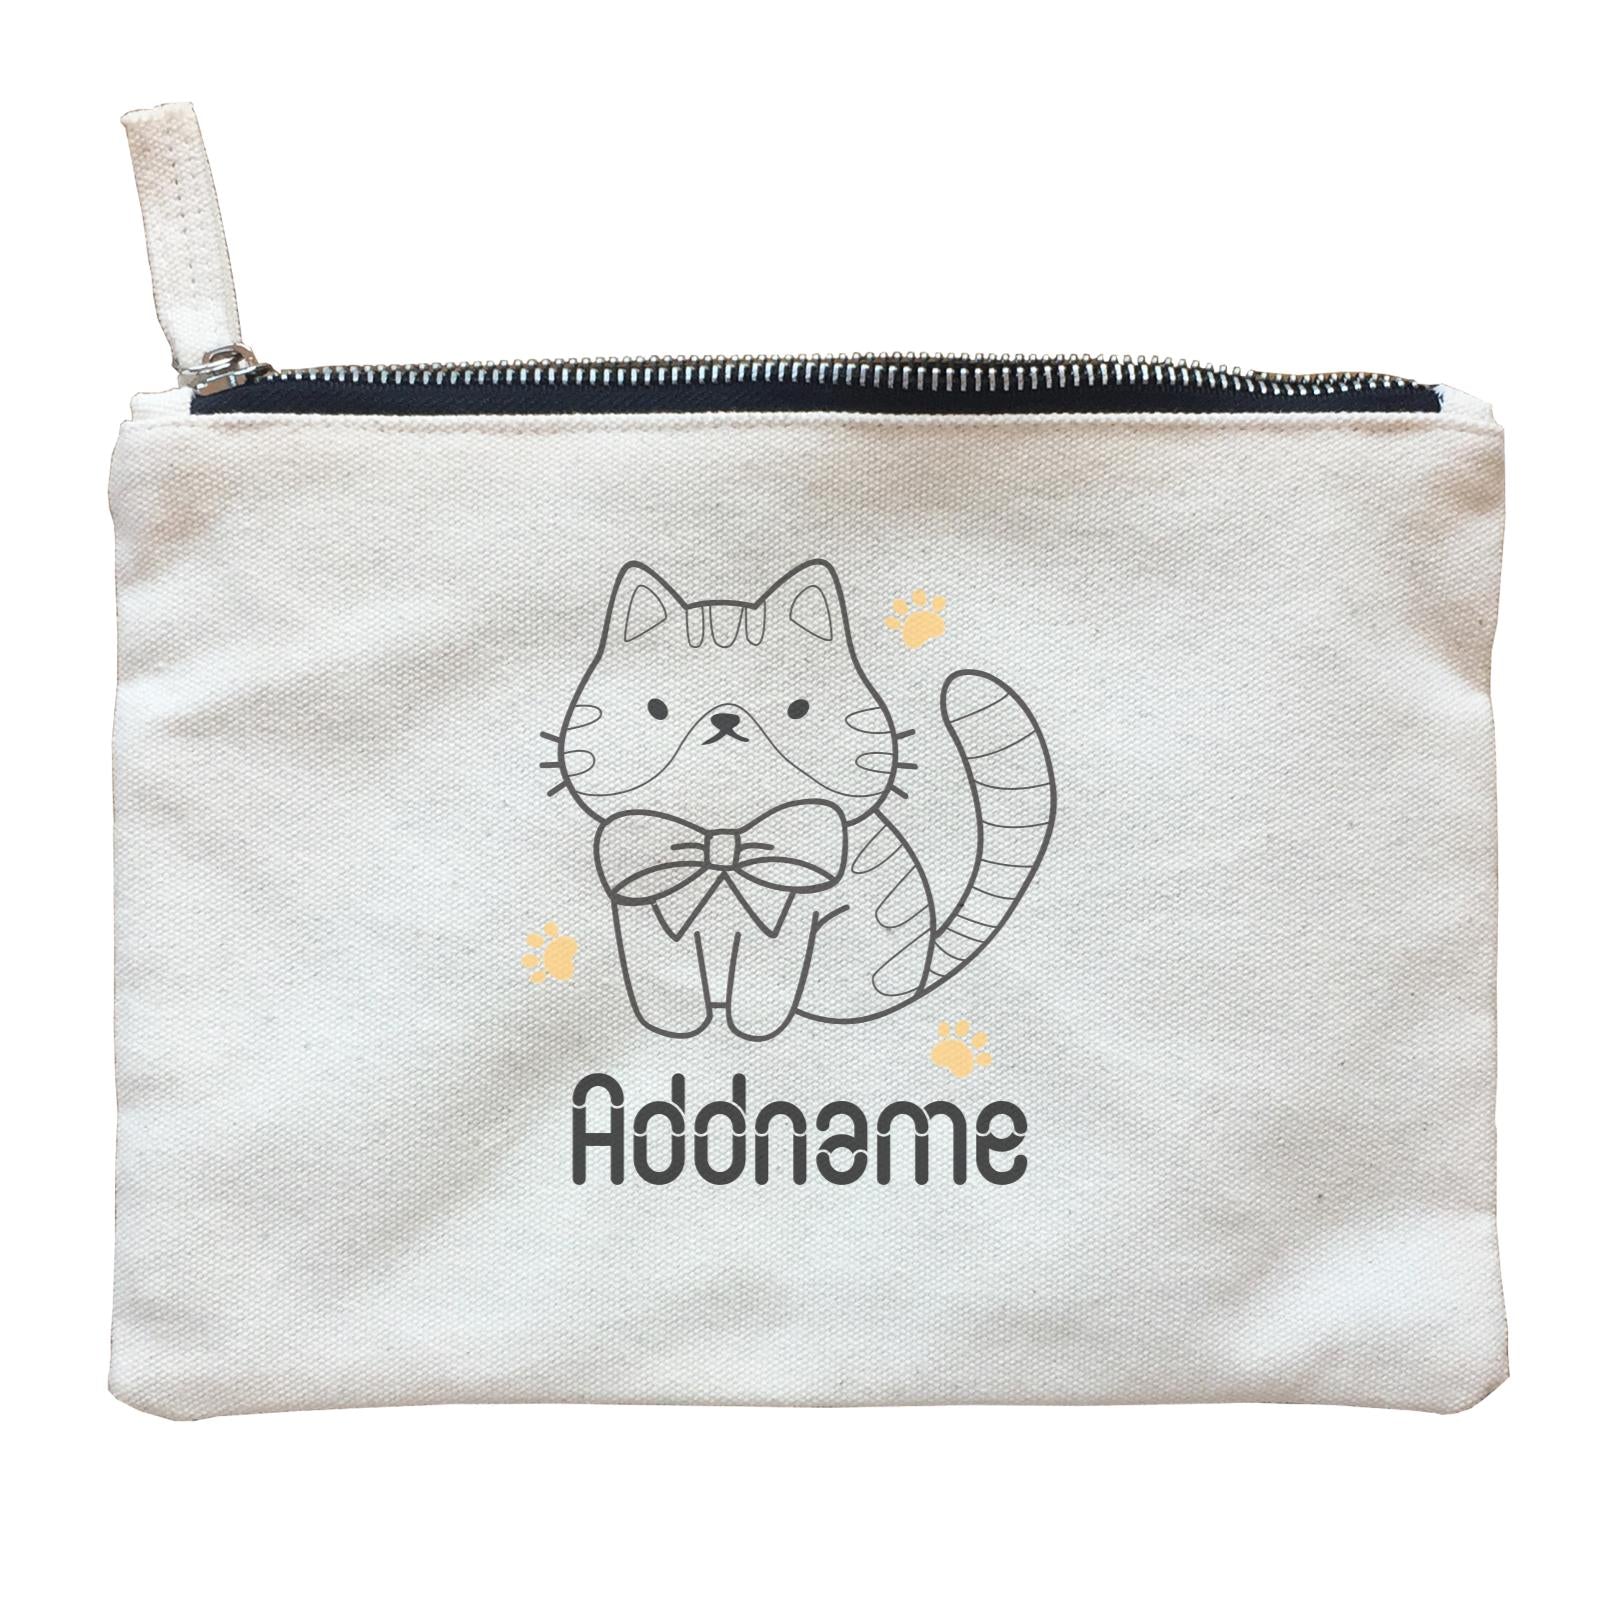 Coloring Outline Cute Hand Drawn Animals Cats Brown Cat With Ribbon Addname Zipper Pouch